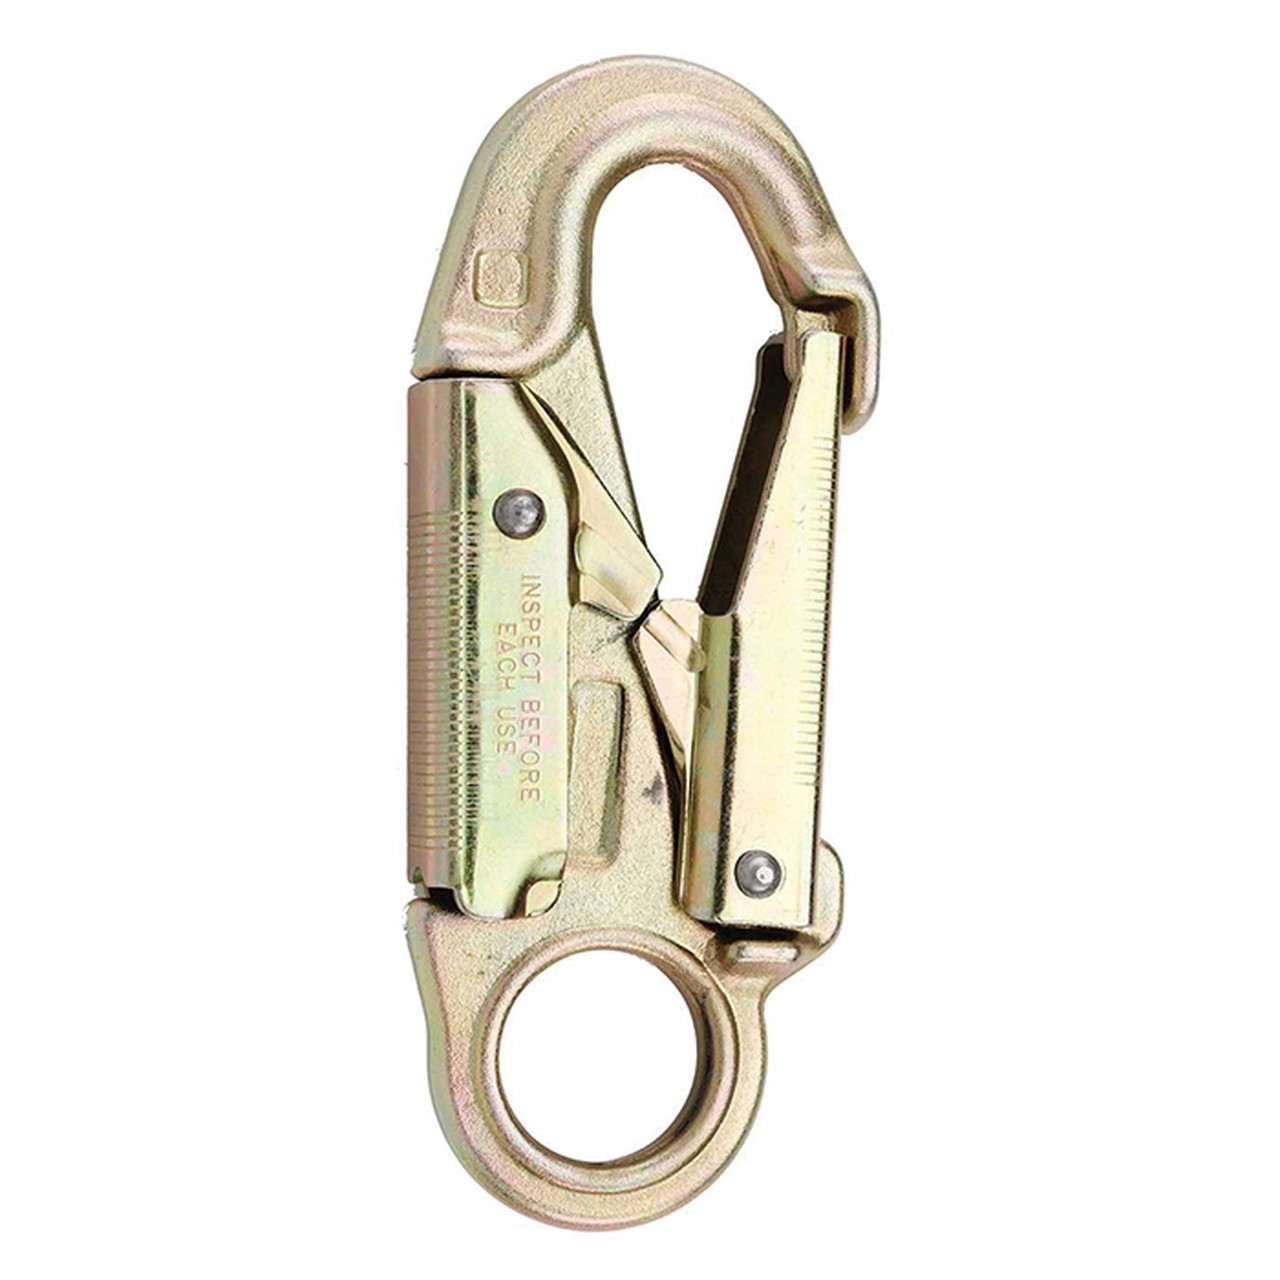 Forged Steel Safety Snaphook by U.S. Rigging